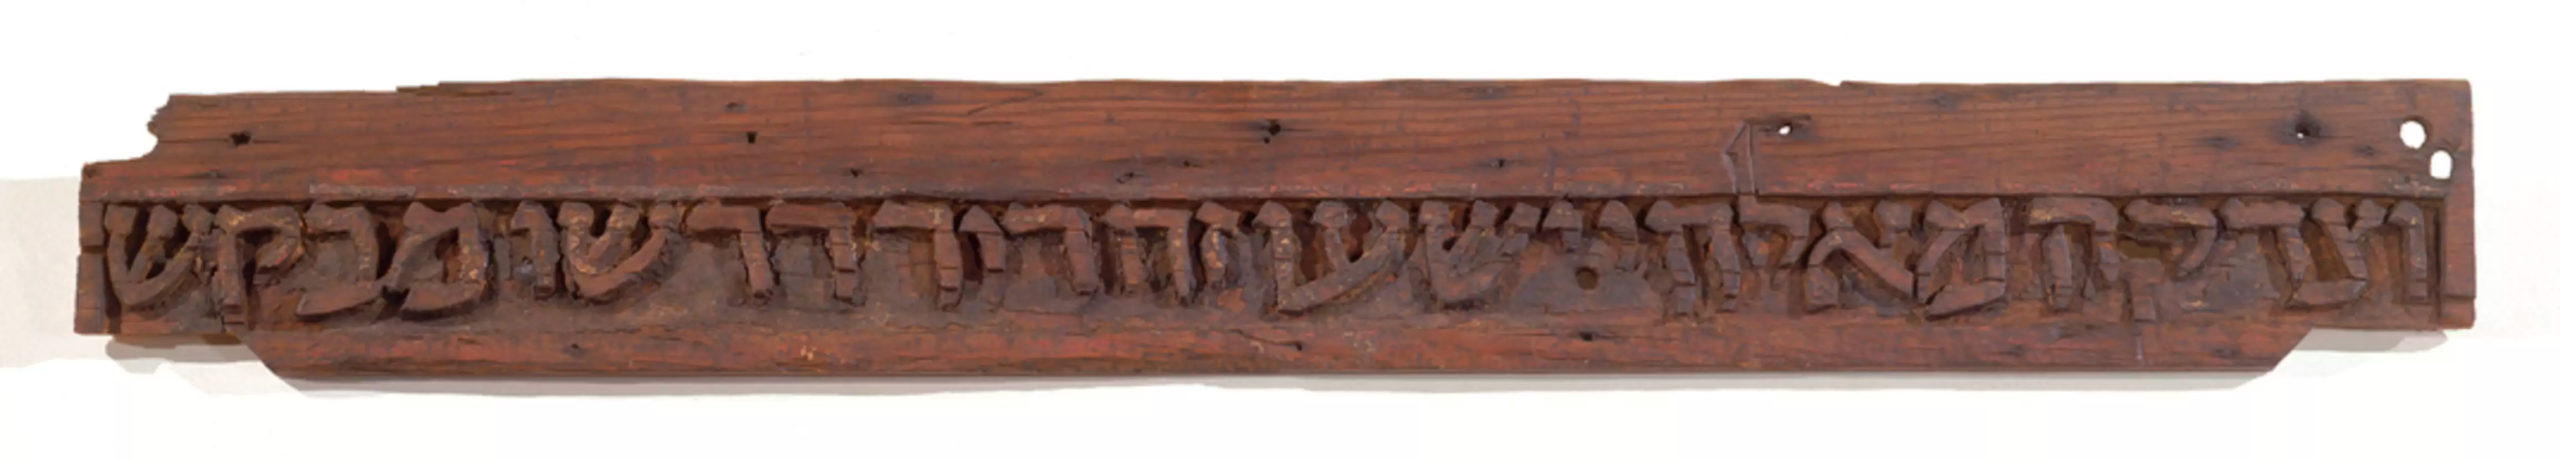 "...a just reward from God, His deliverer. Such is the generation of those who turn to Him" (Psalm 24:5-6). Ben Ezra Synagogue, Fustat, Egypt, 1220, wood, 8.1 x 66.4 cm (Jewish Museum)